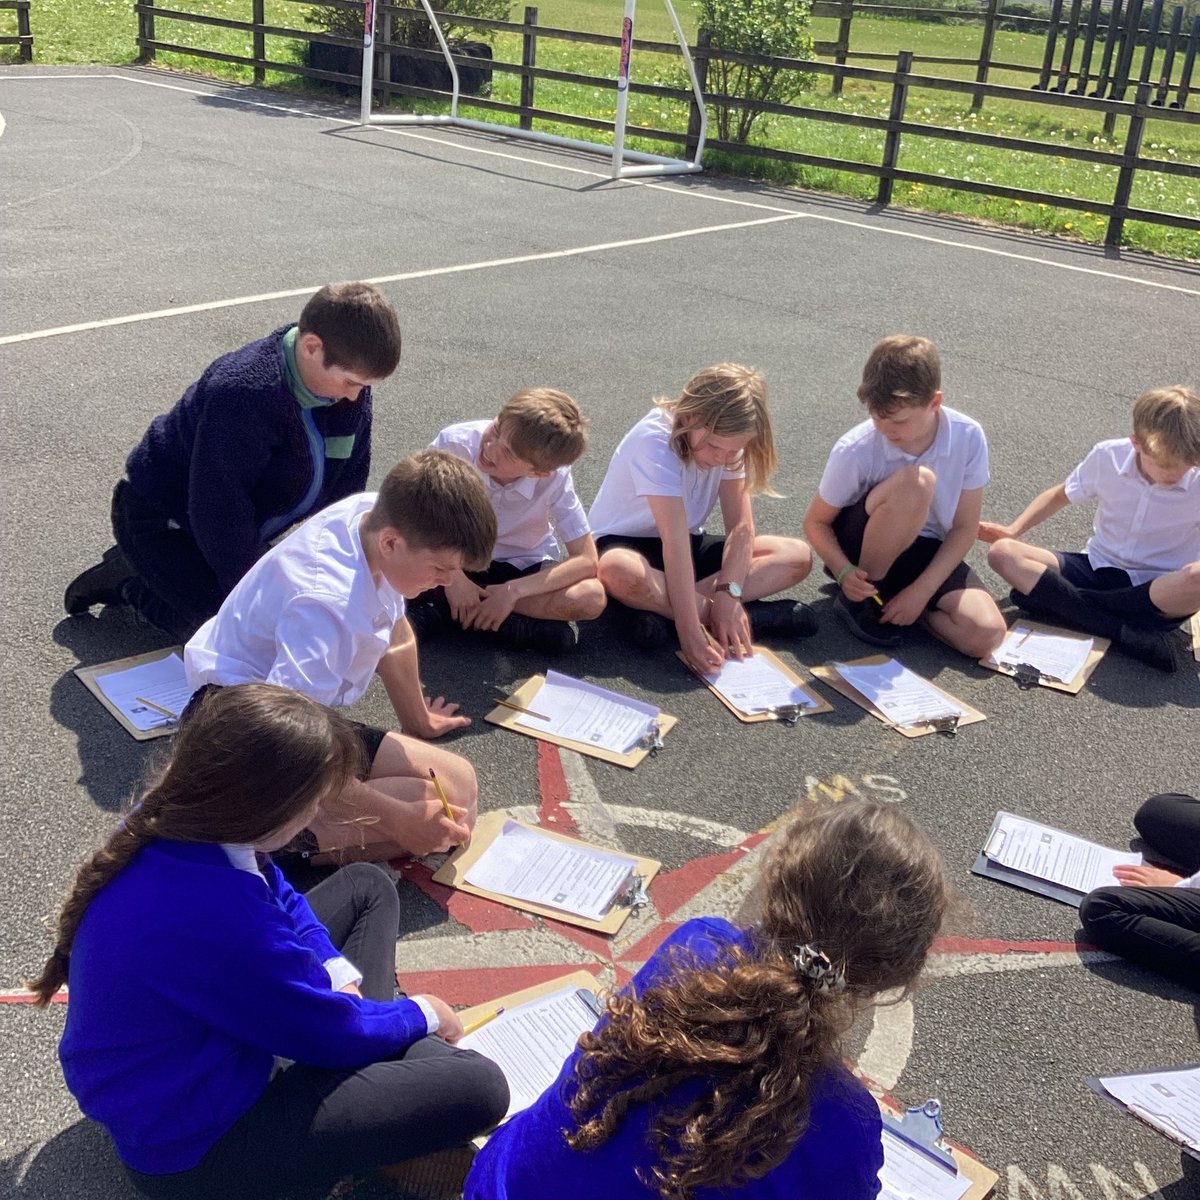 Class 3 at Altarnun Primary enjoyed the sunshine while learning about heart health and exercise yesterday! From monitoring heart rates to exploring recovery rates, it was an exciting afternoon in science. #SunshineLearning #ScienceFun #HeartHealth #ScienceExploration